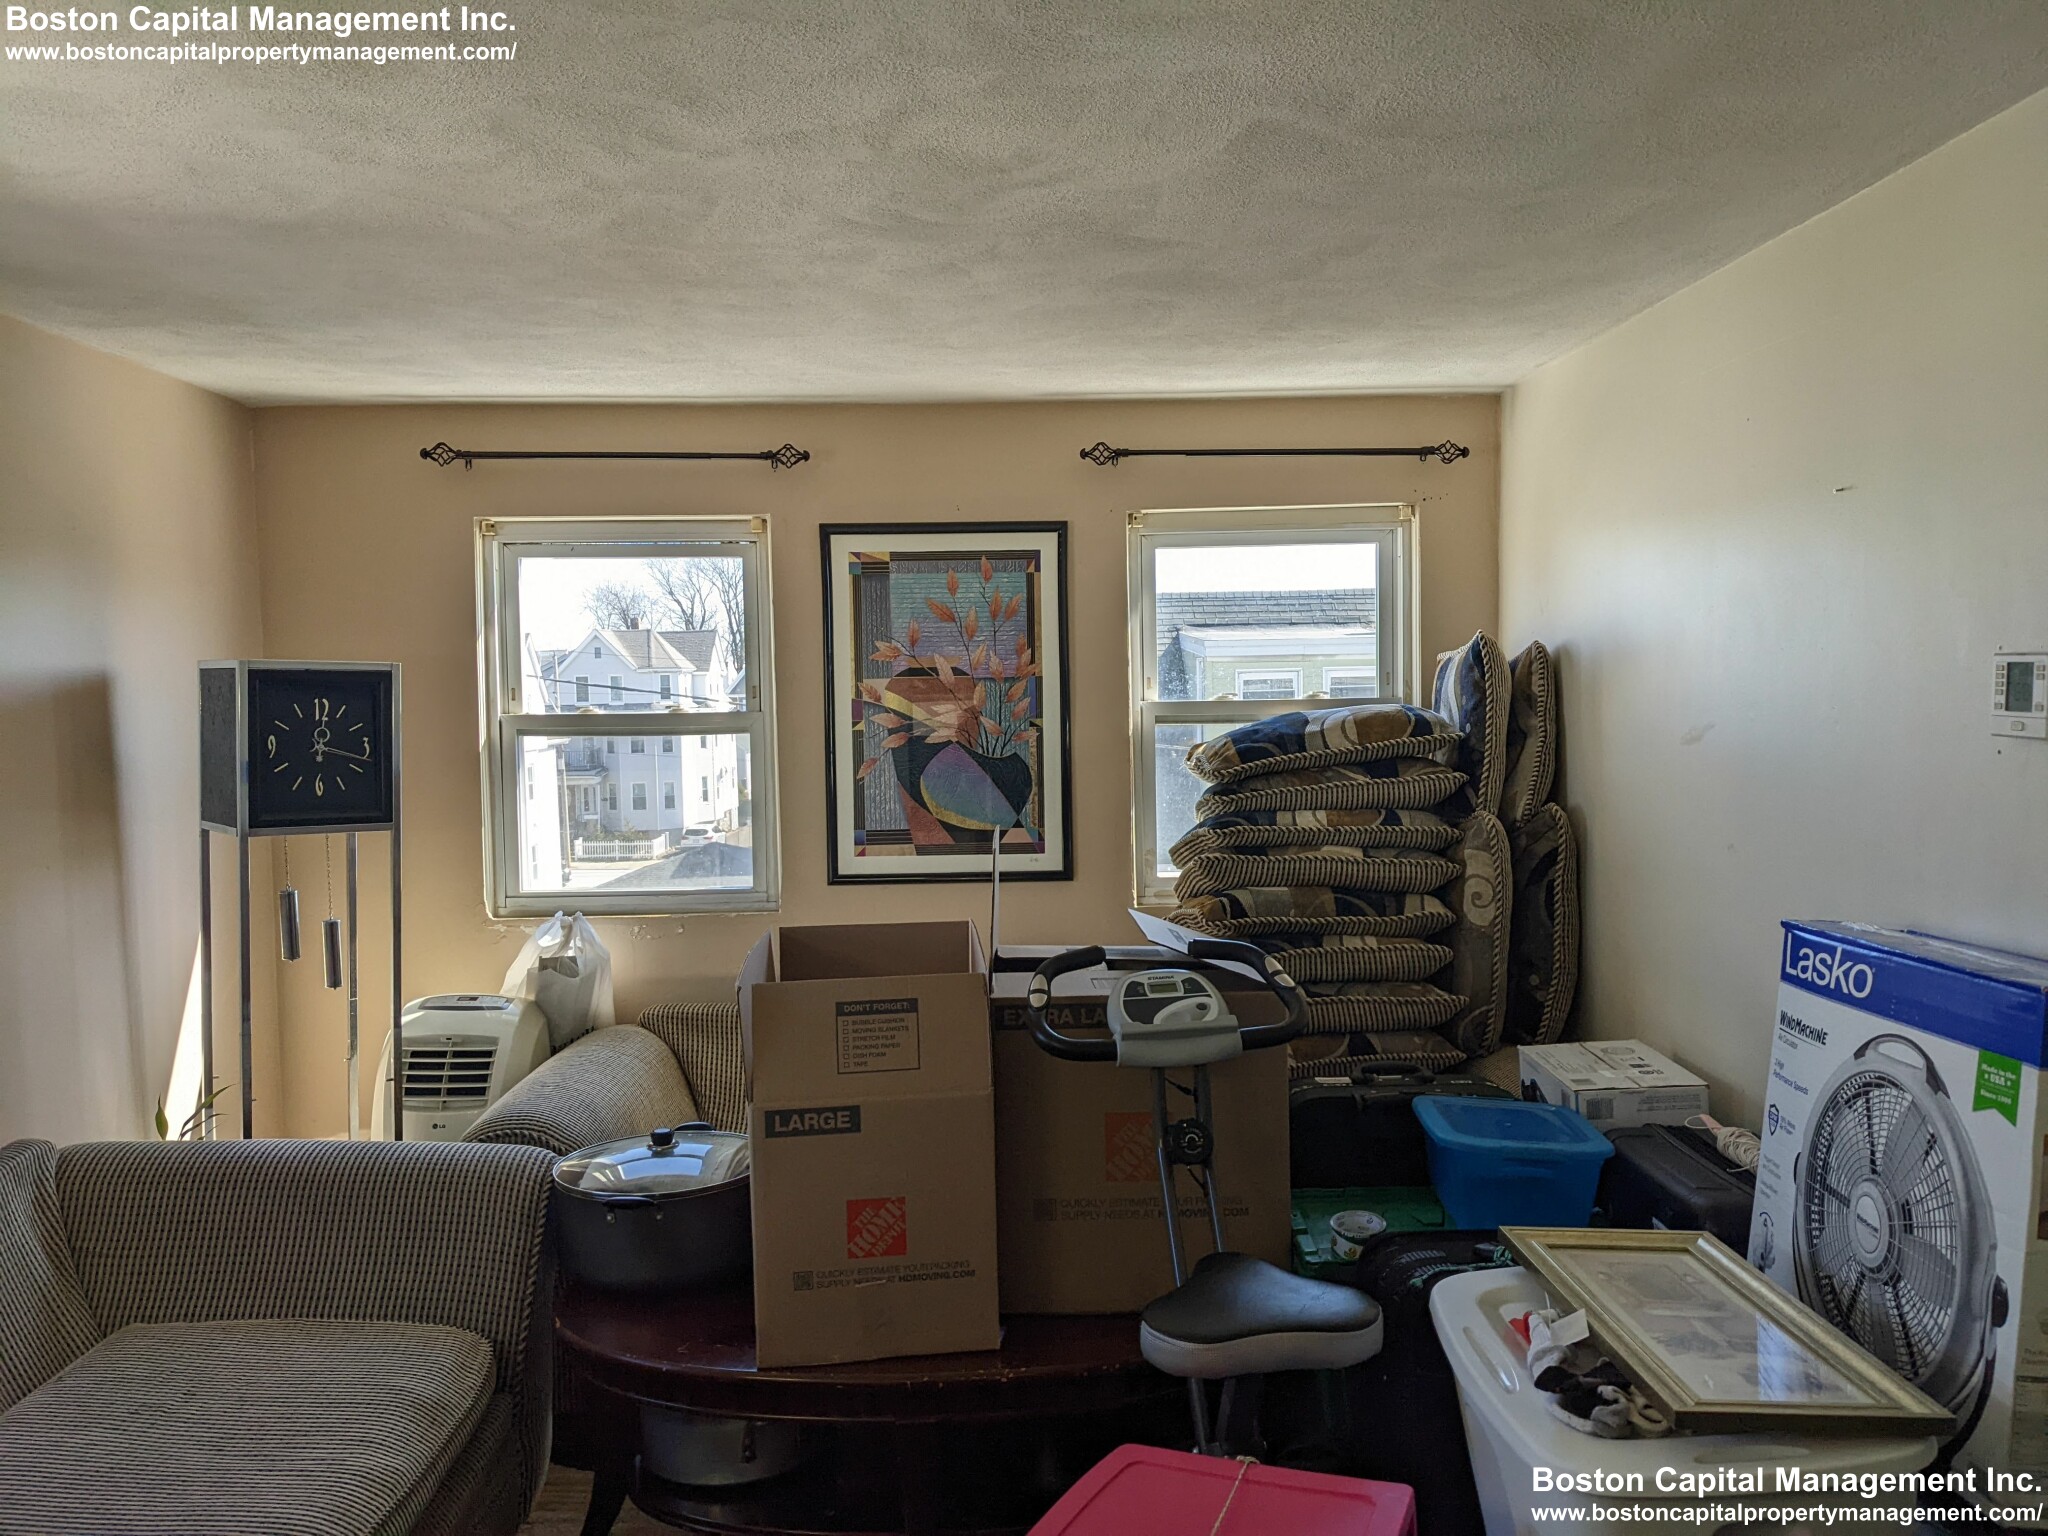 Photos of apartment on Florence St.,Everett MA 02149